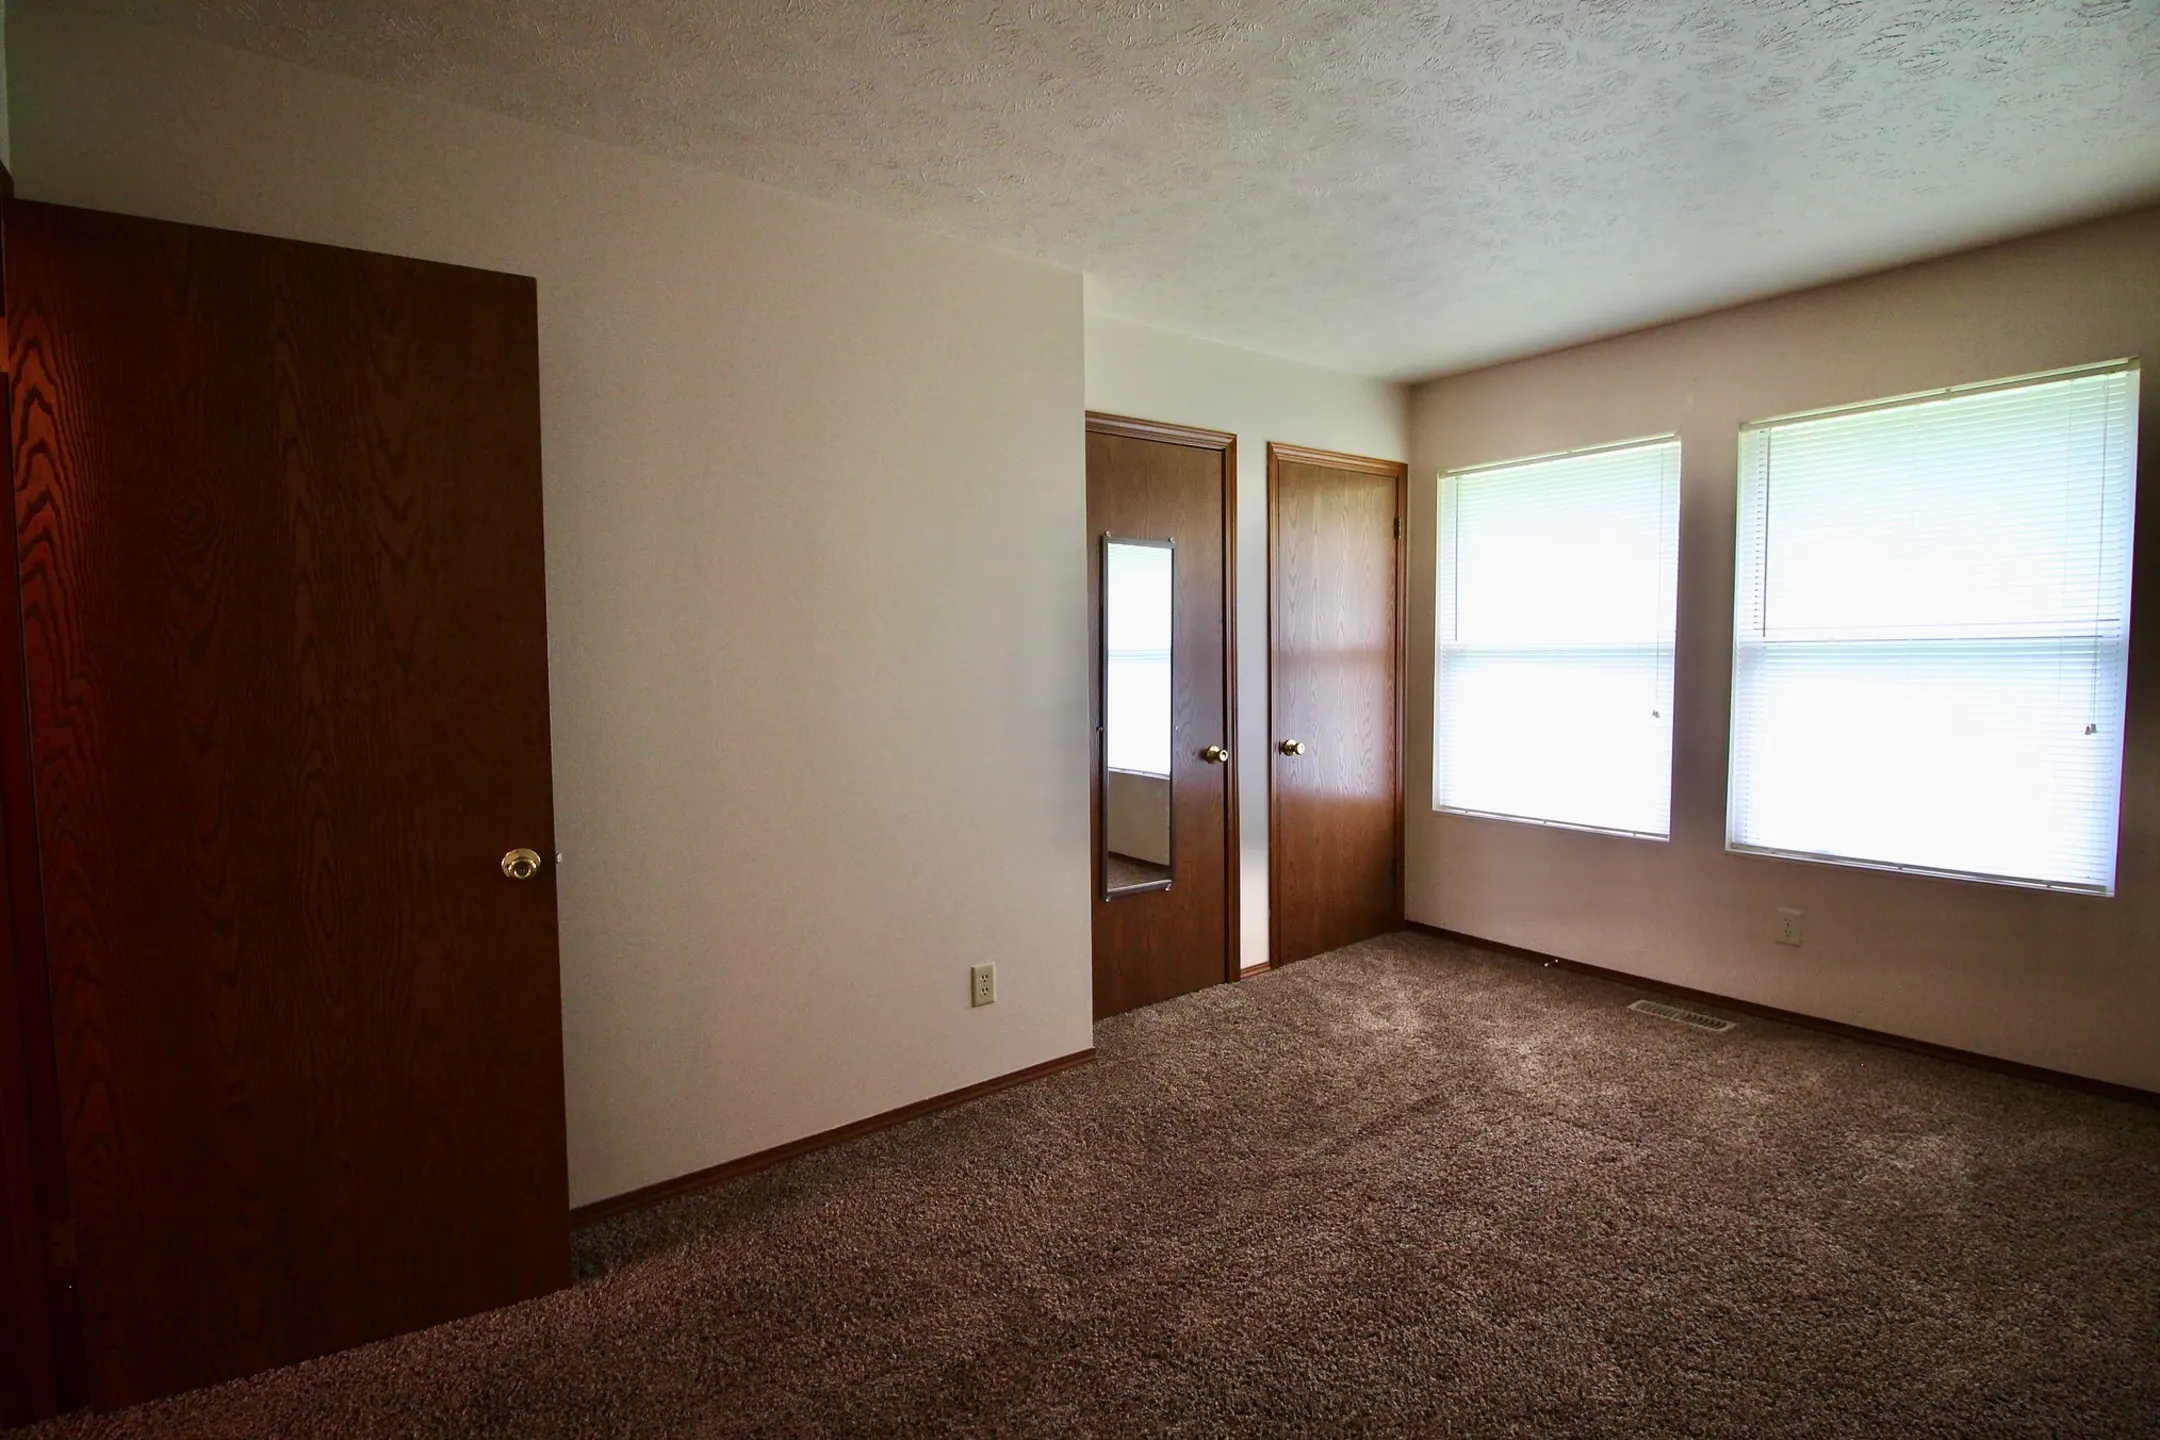 Bedroom - Northgate Apartments - Rochester, IN